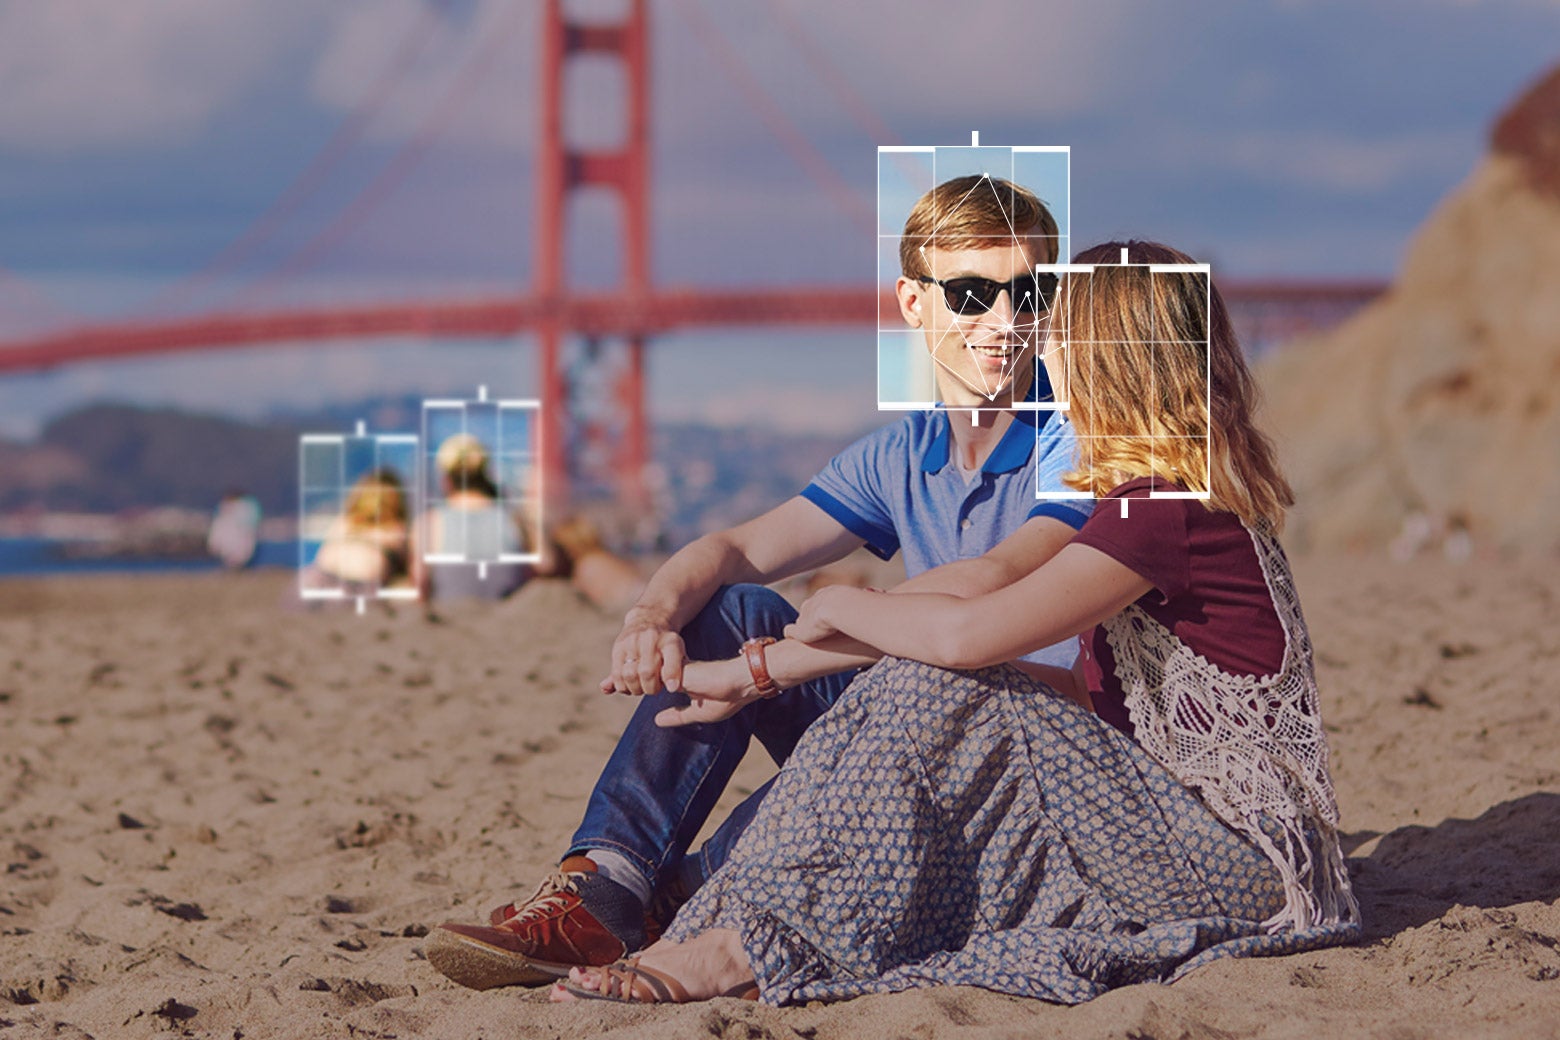 Photo illustration of two people sitting on a beach near the Golden Gate Bridge, but with facial recognition–esque highlights around their faces to note active surveillance.